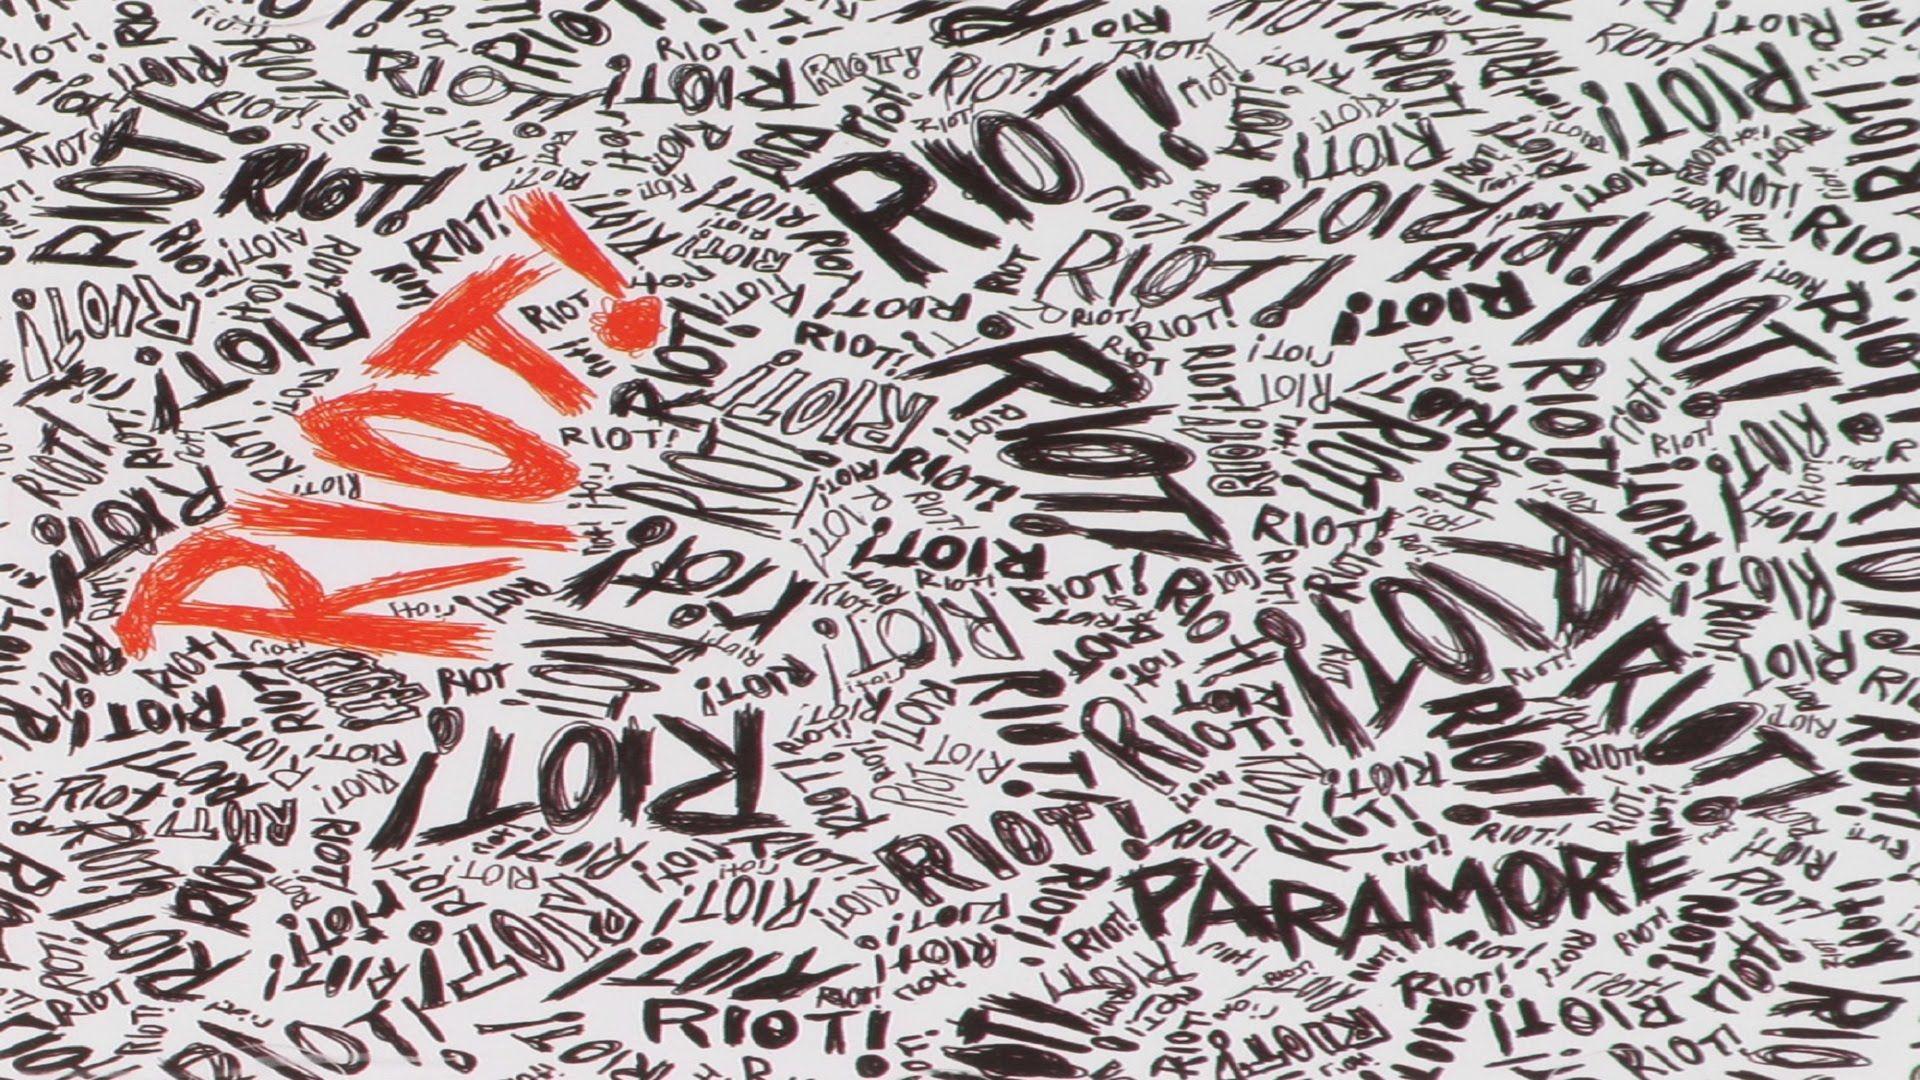 Best Songs From Album:Riot! (Paramore)